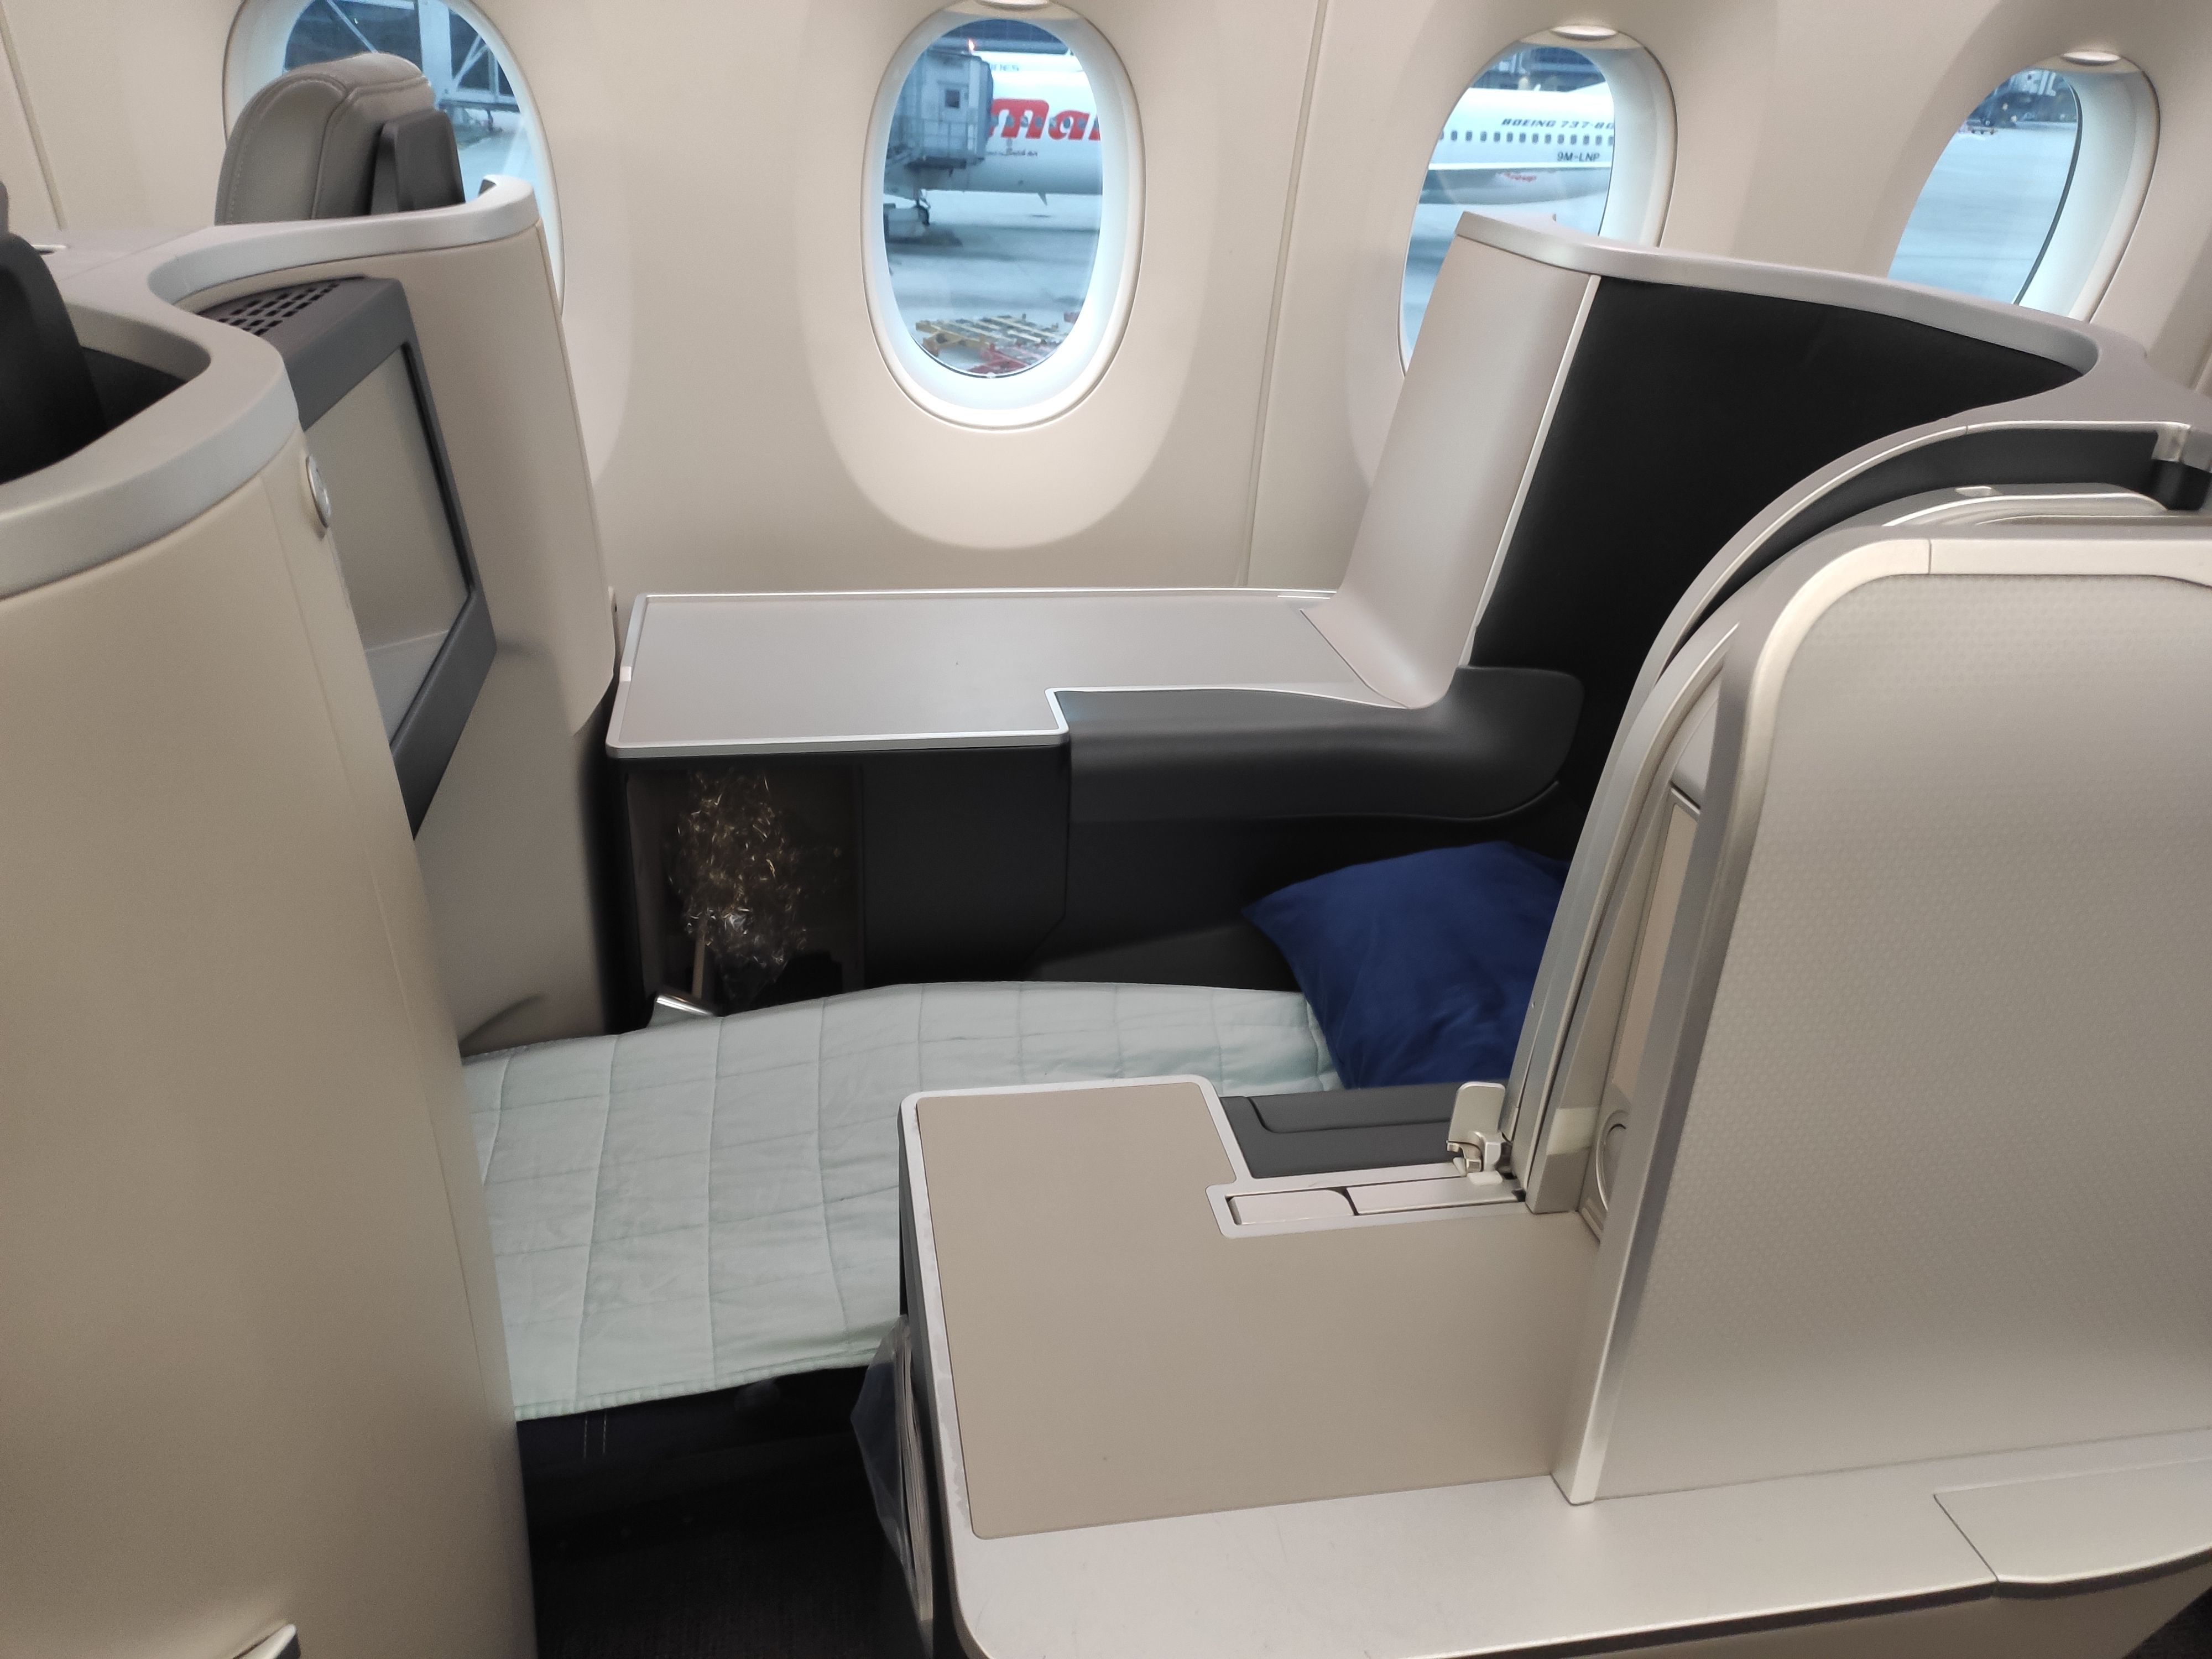 A Malaysia Airlines Business Class Throne Seat.